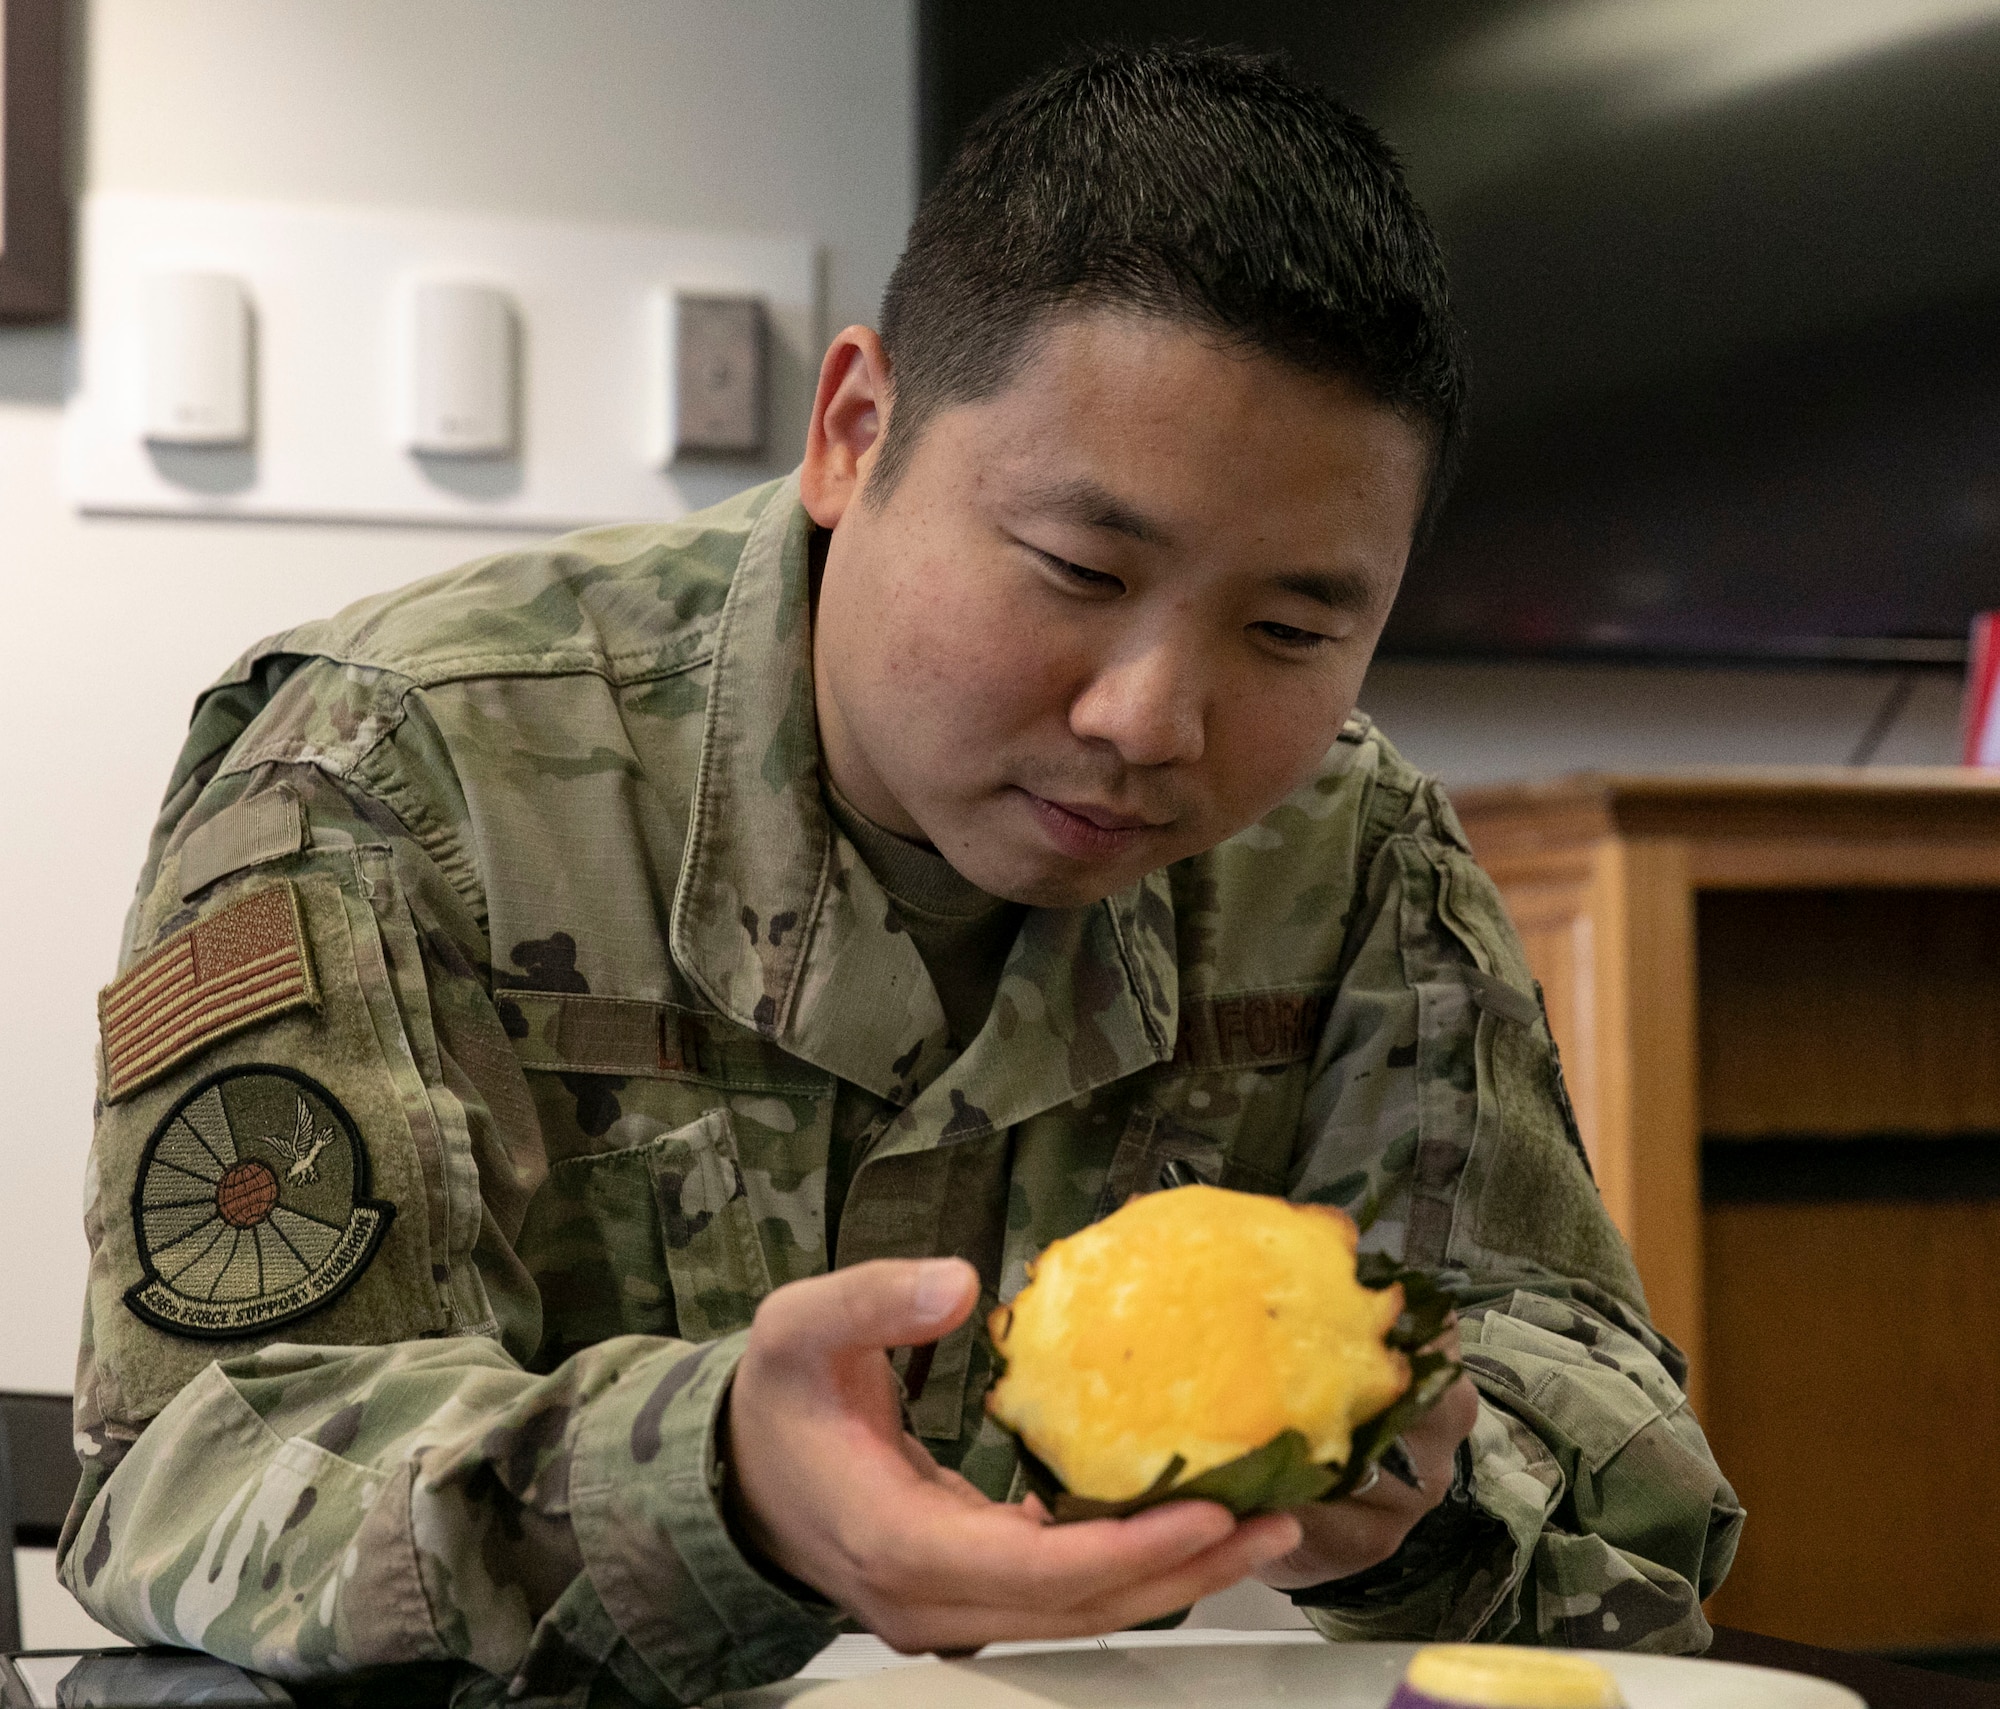 Capt. Benjamin Lee, 436th Force Support Squadron operations officer, examines a dessert entered in The Great Diversity Dessert Bake-Off Challenge held at the Patterson Dining Facility on Dover Air Force Base, Delaware, Aug. 24, 2022. Lee was one of four judges for the challenge, which was part of the 436th Force Support Squadron's National Foreign Language Observation week. (U.S. Air Force photo by Roland Balik)